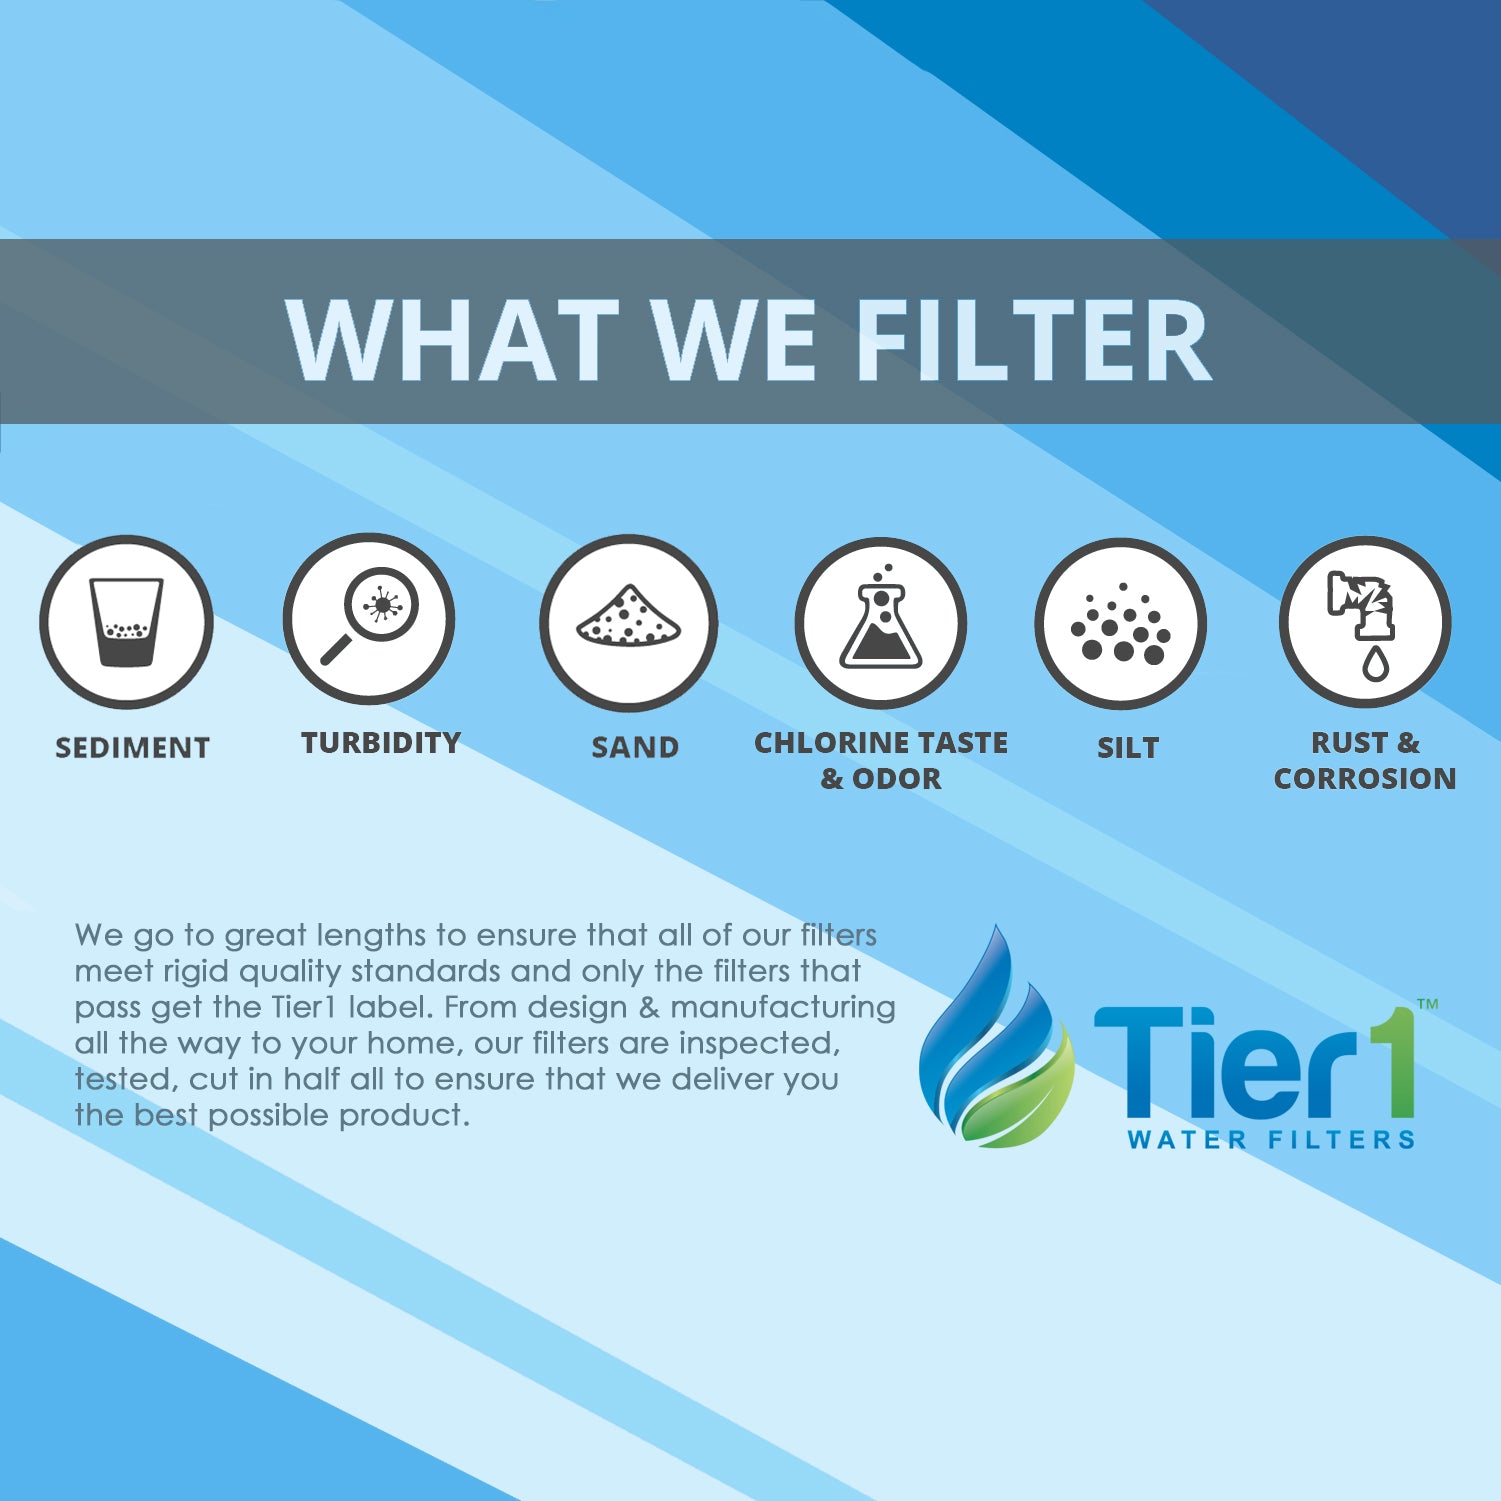 10 X 2.5 Polypropylene Replacement Filter by Tier1 (1 micron)